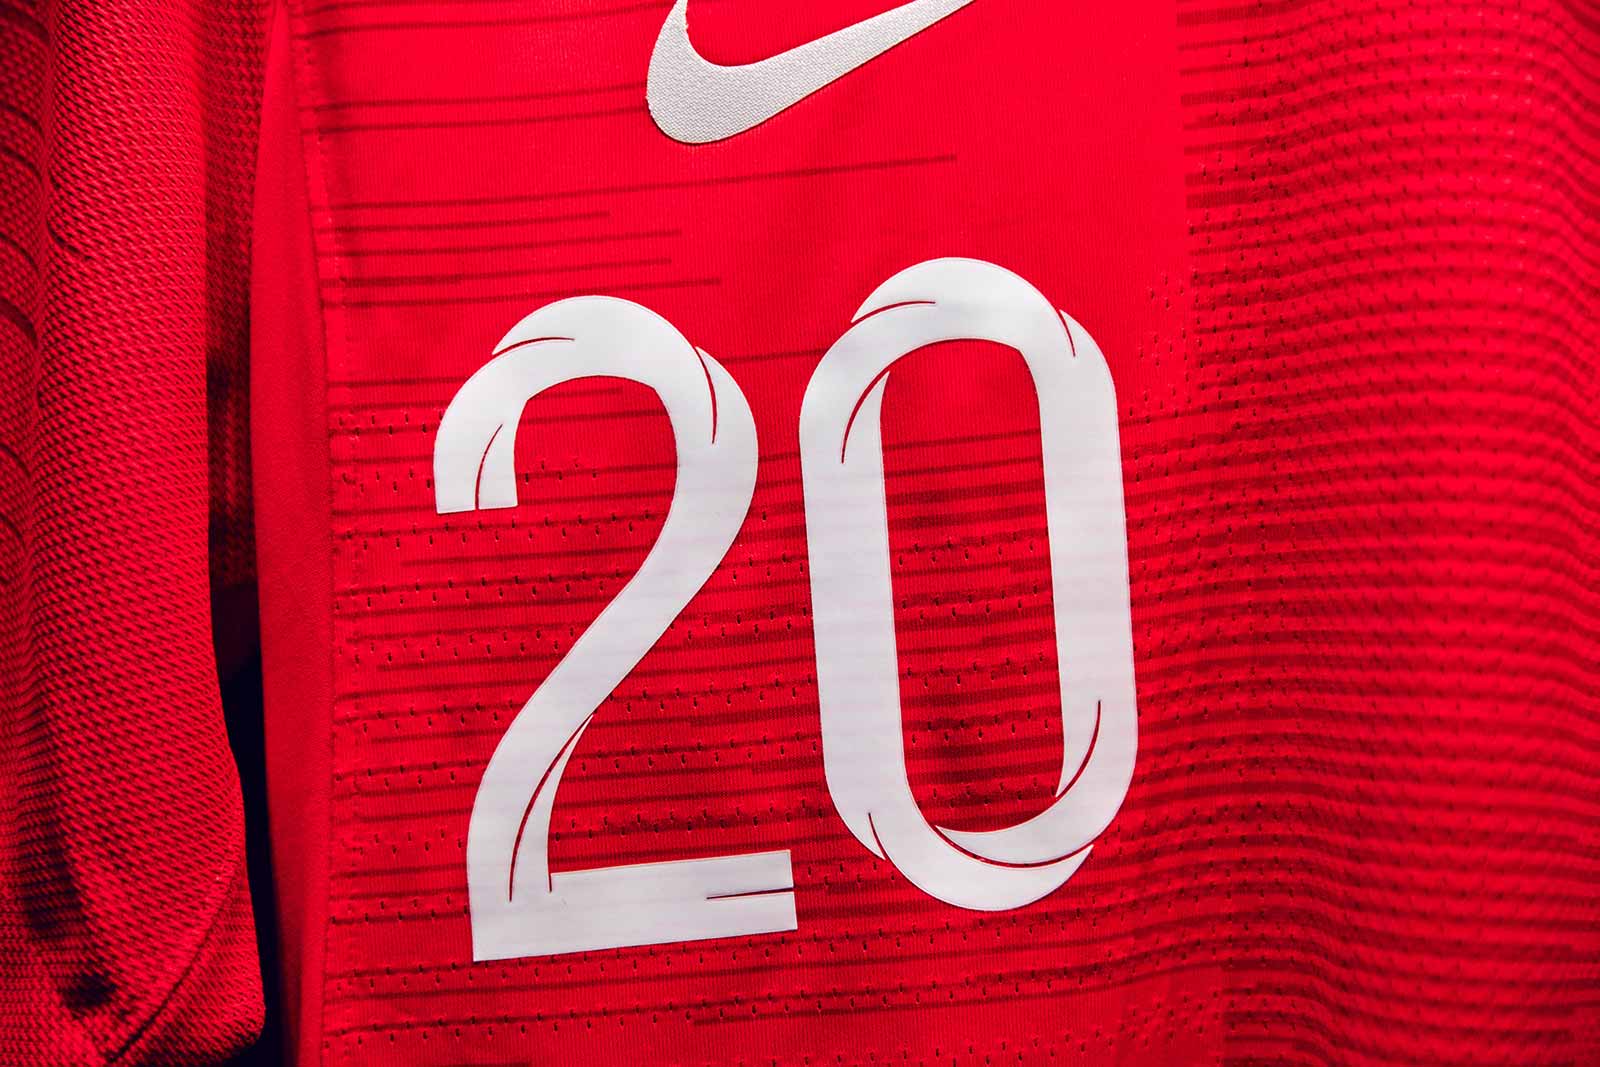 in-detail-unique-nike-england-2018-world-cup-font%2B%25282%2529.jpg